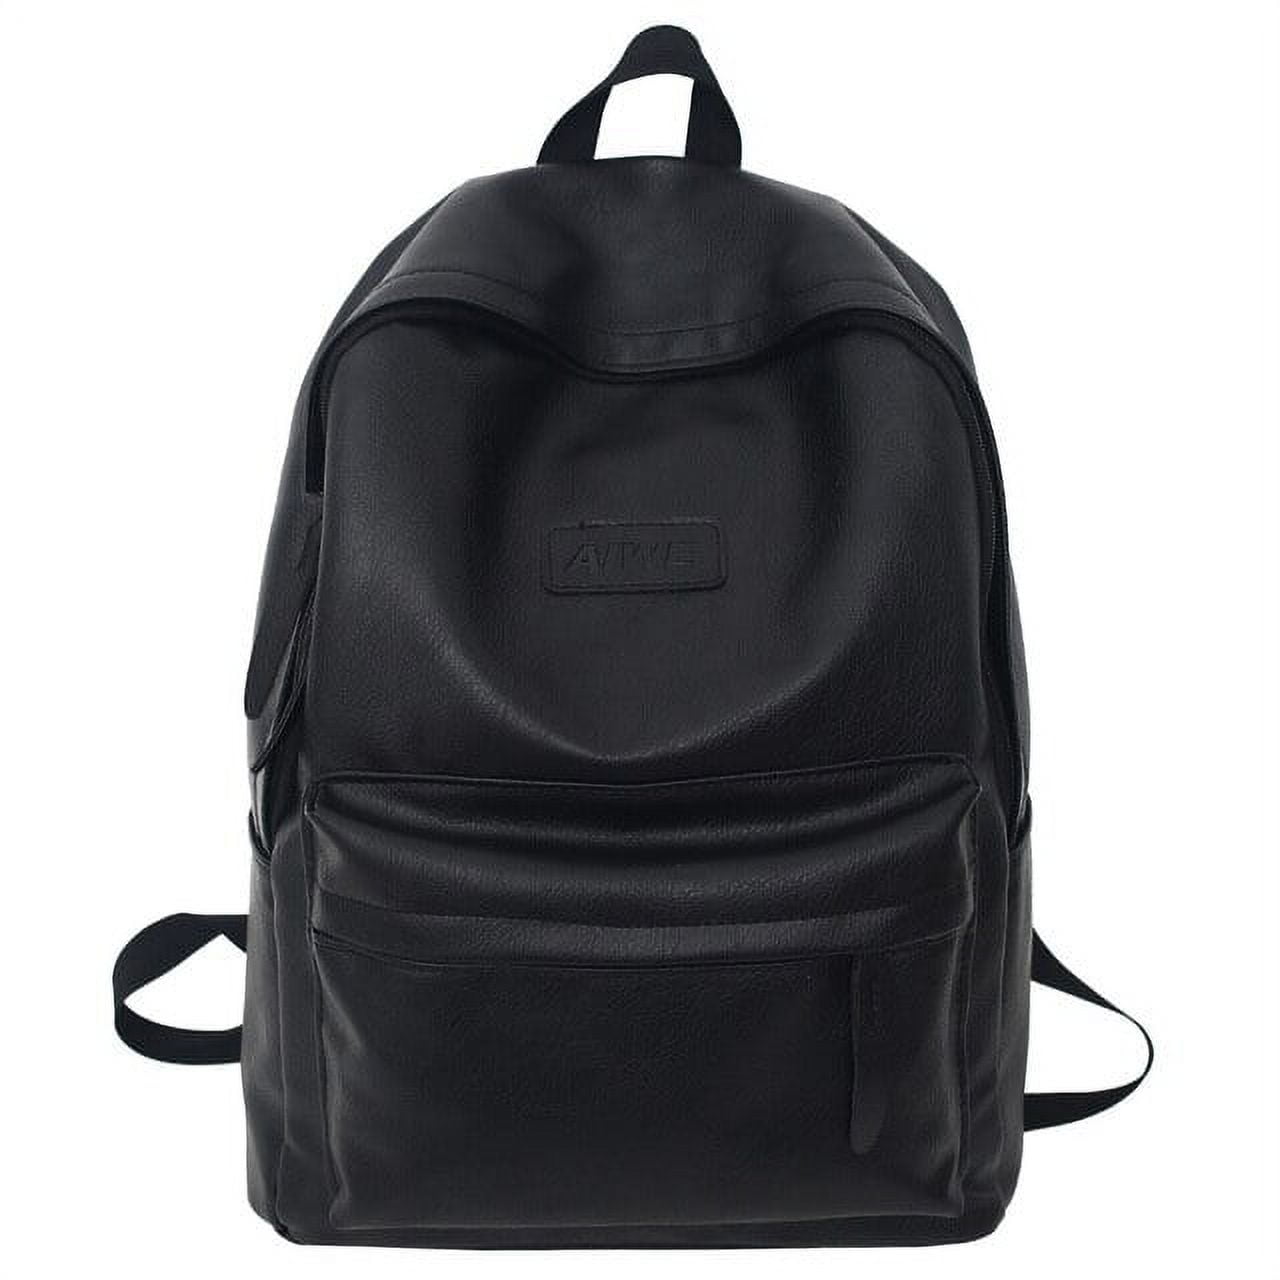 brand expensive backpack